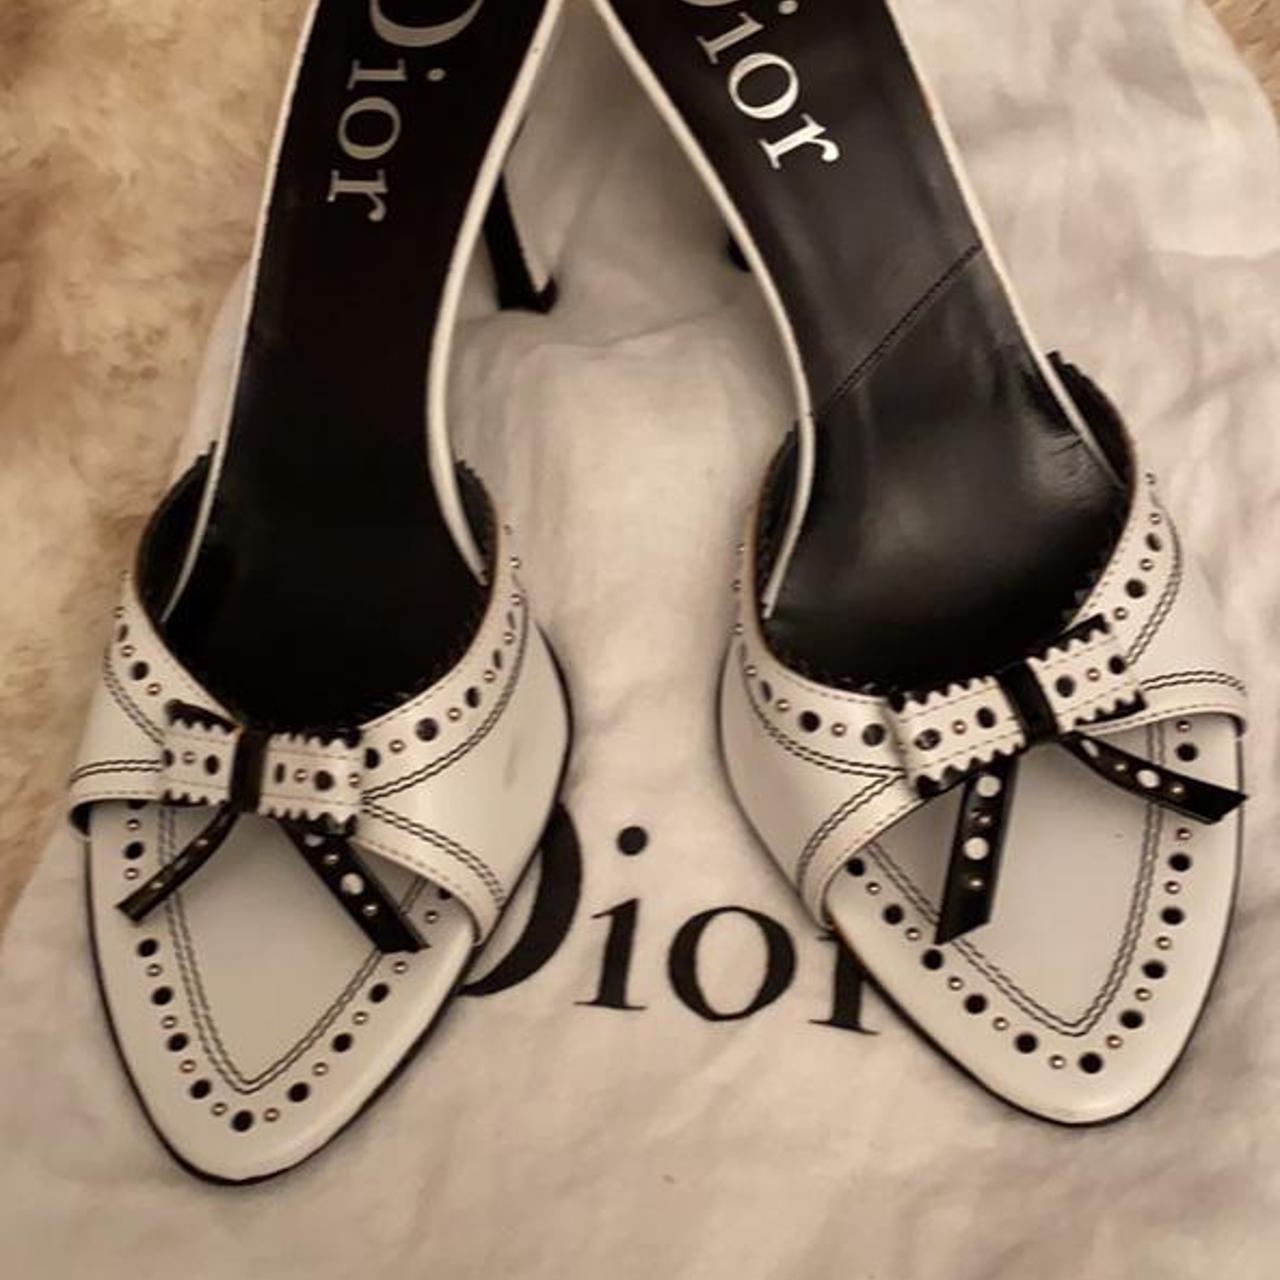 Dior Women's White and Black Sandals